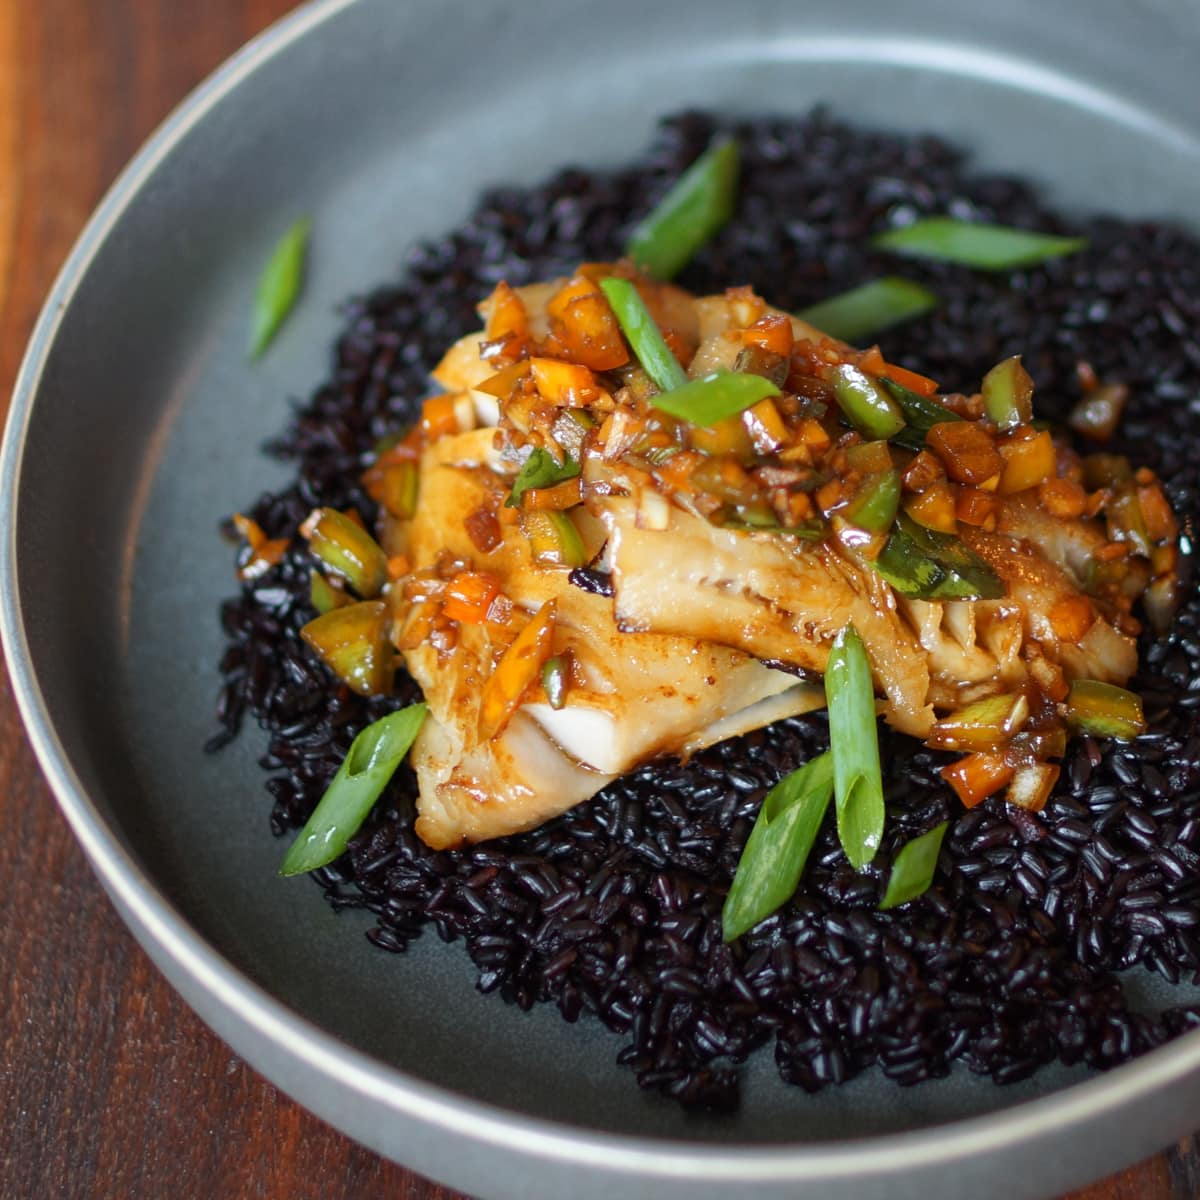 Miso marinated black cod with pepper, onion and daikon vinaigrette served over forbidden rice.